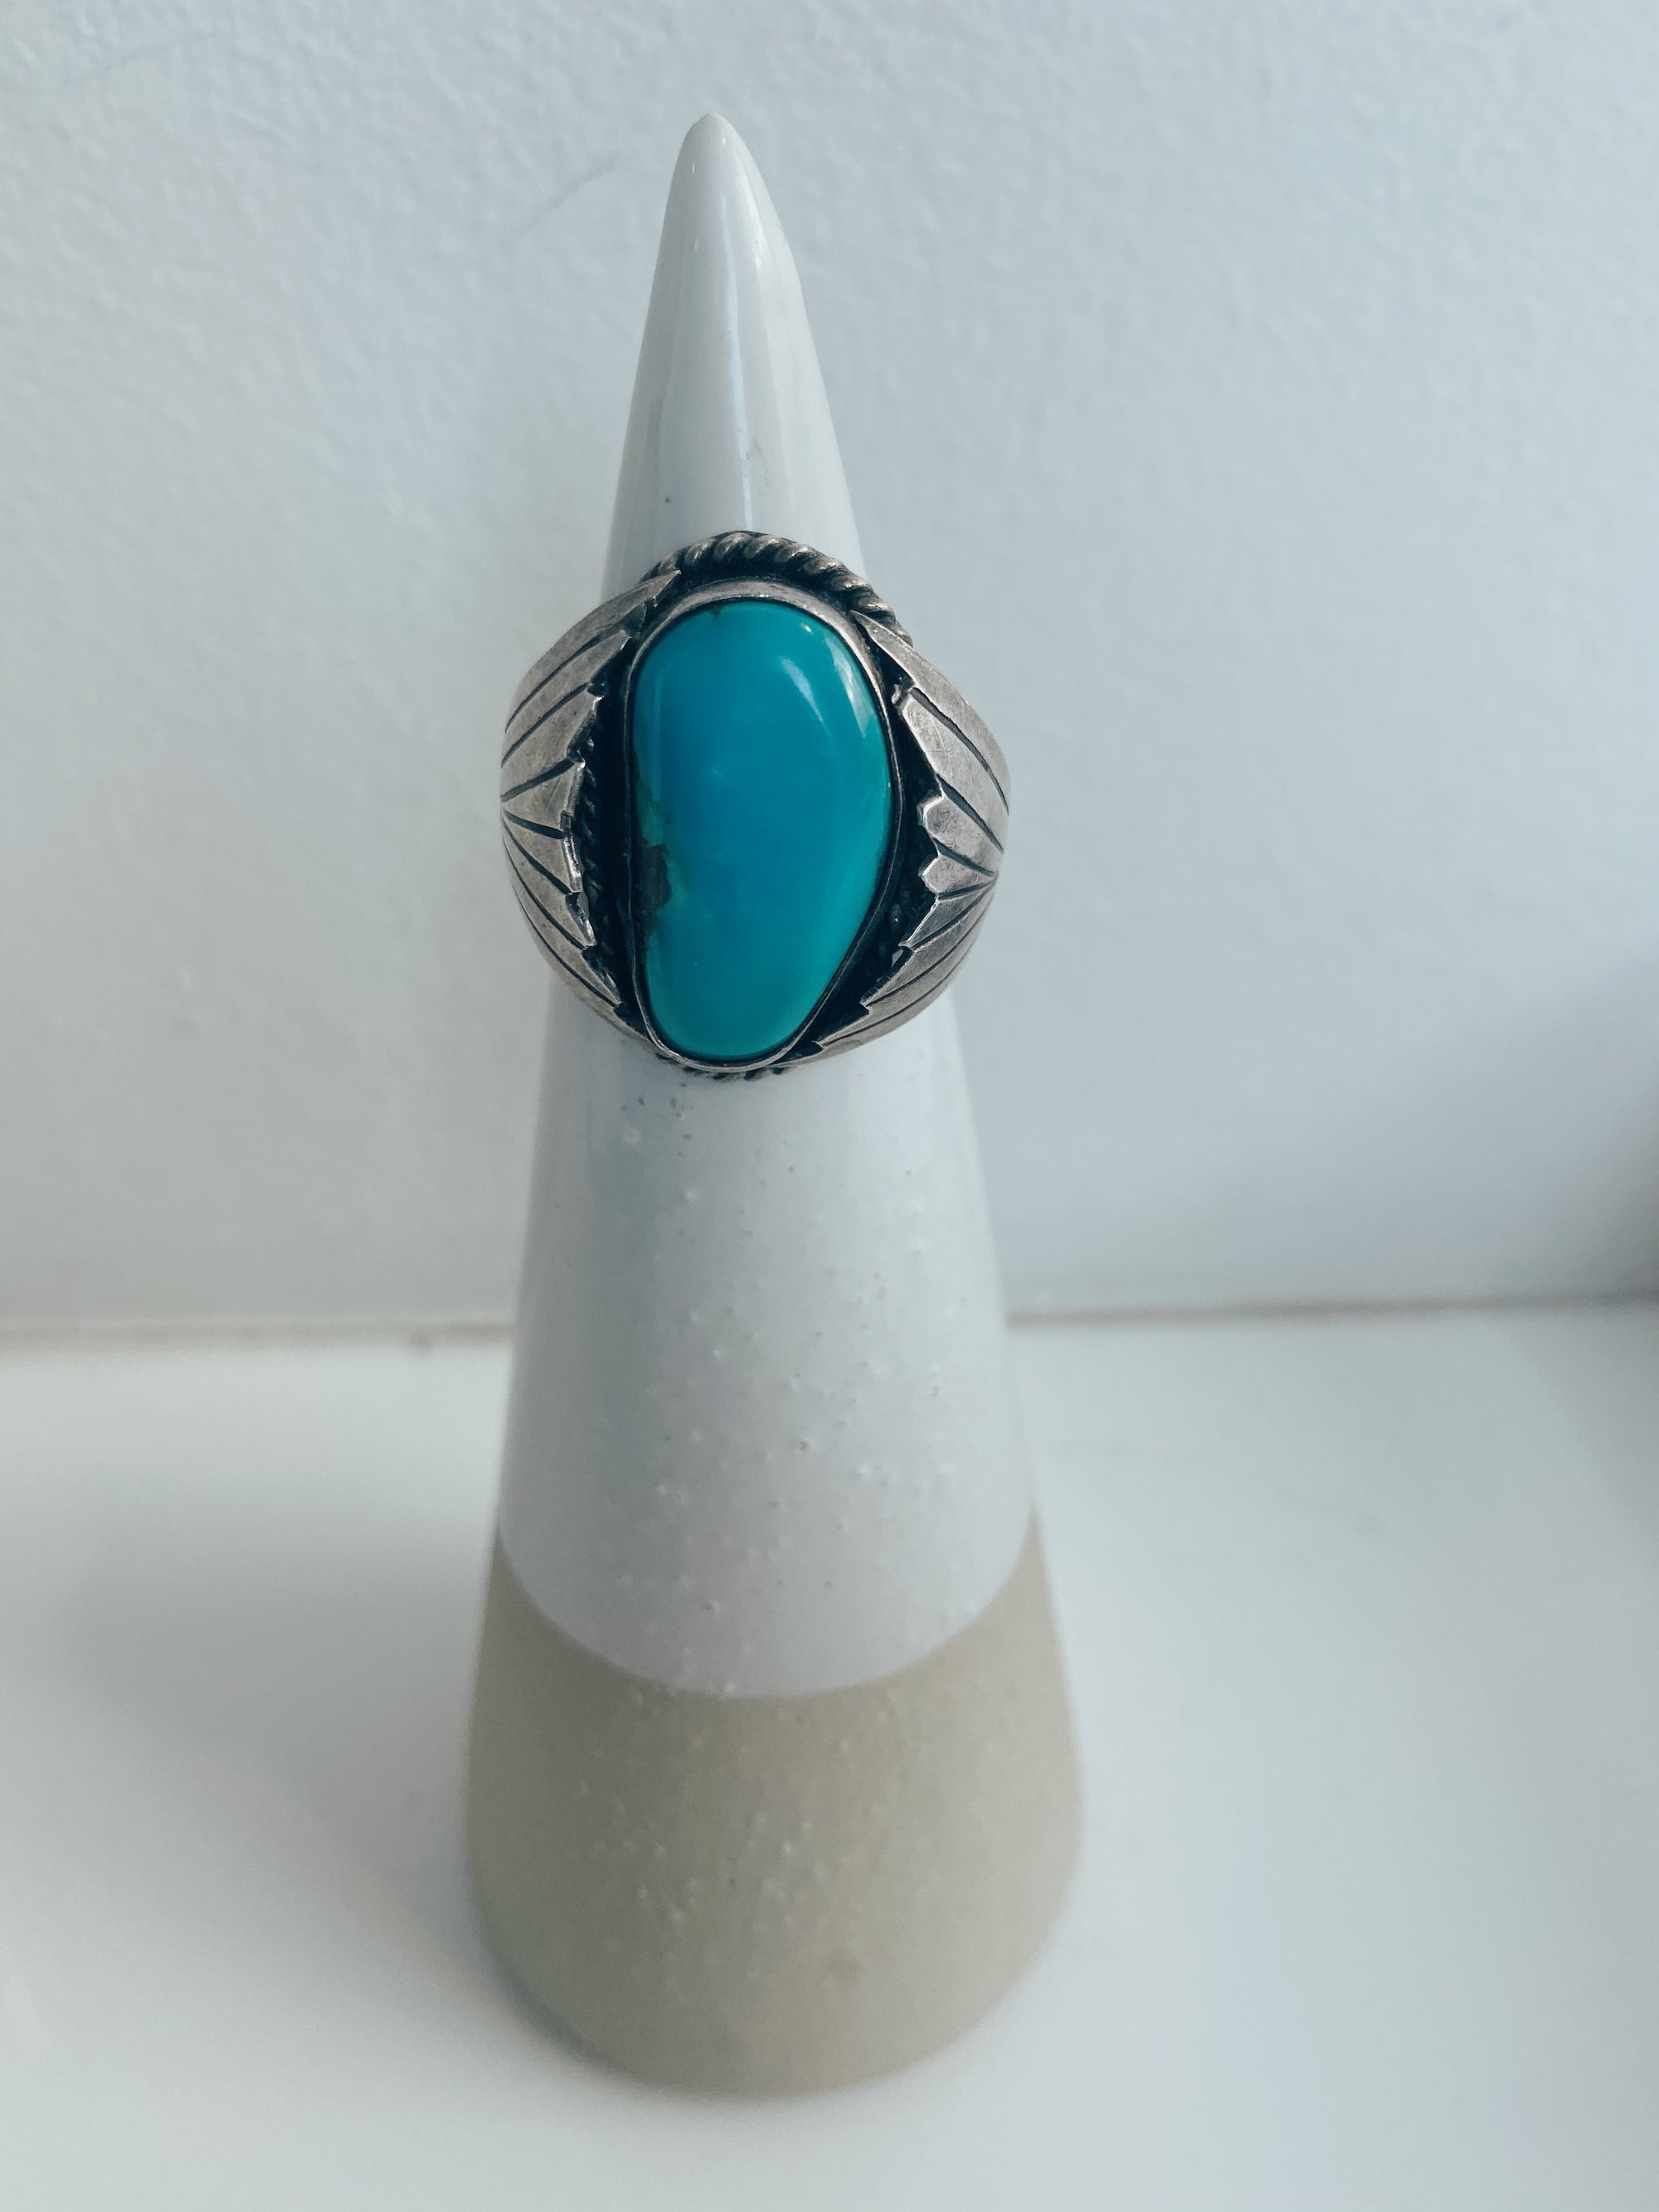 Vintage Ring with Large Turquoise Stone